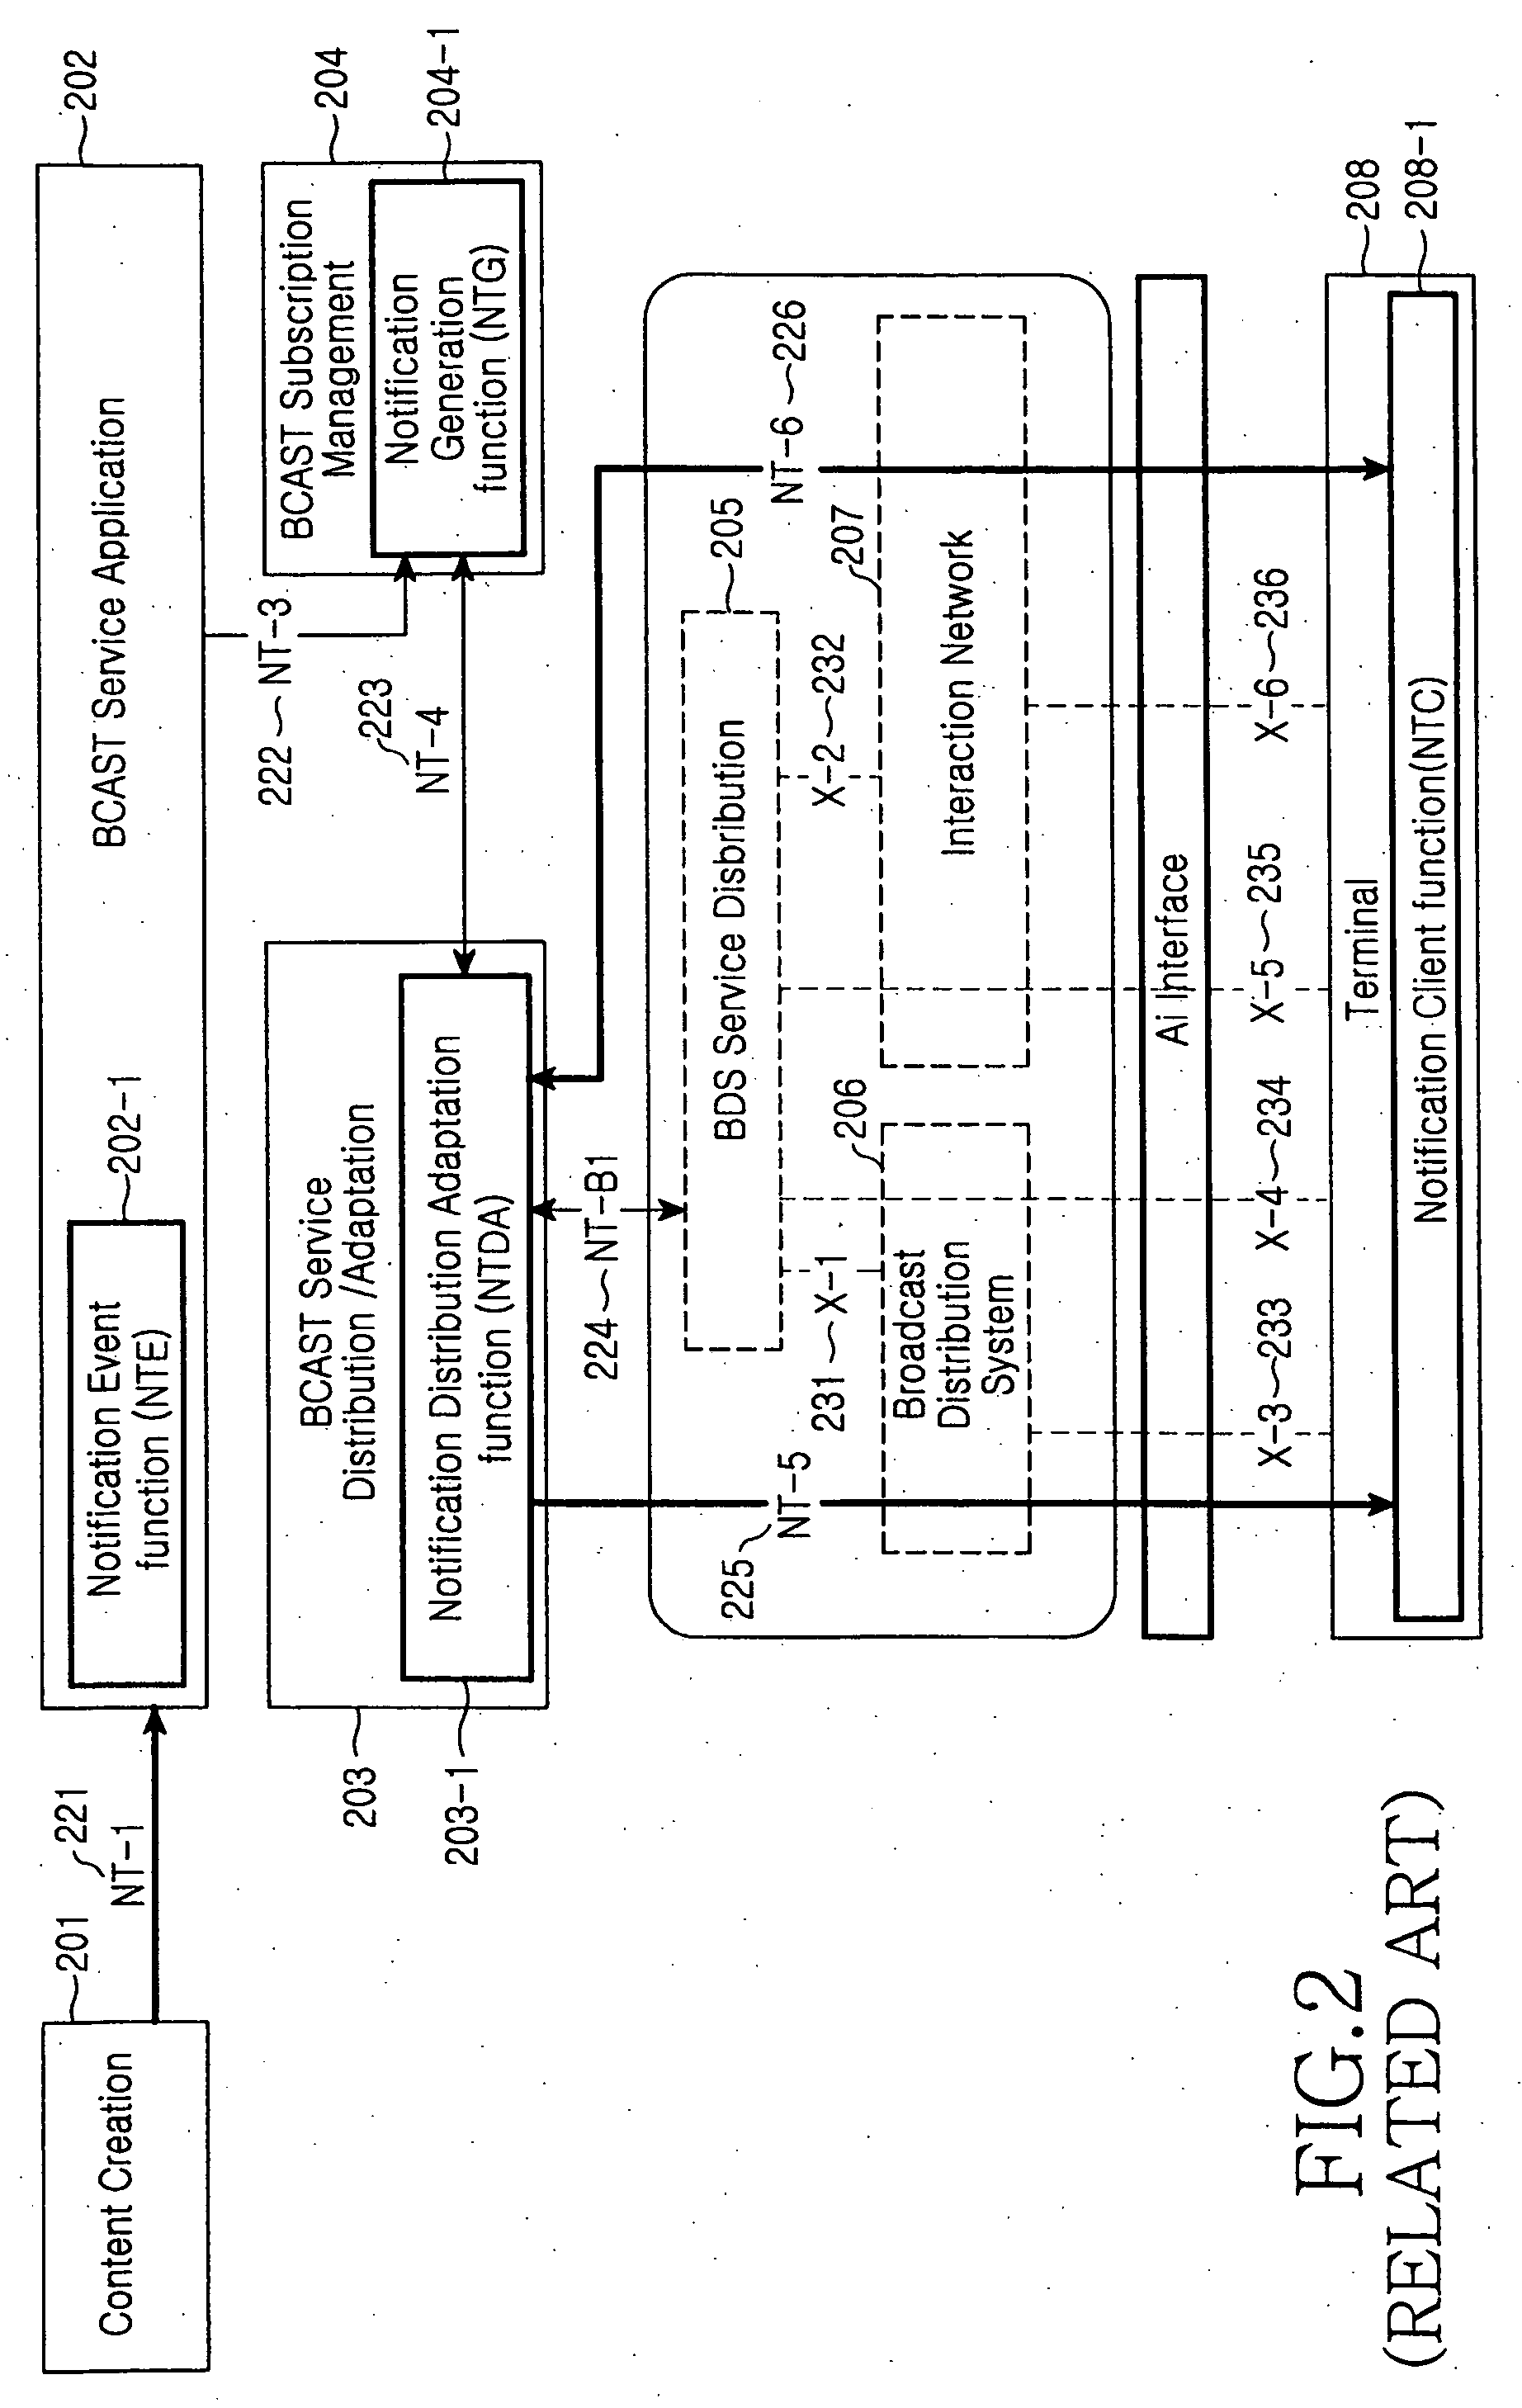 Method for delivering service guide source for generation of service guide in a mobile broadcast system, and method and system for delivering notification event/notification message